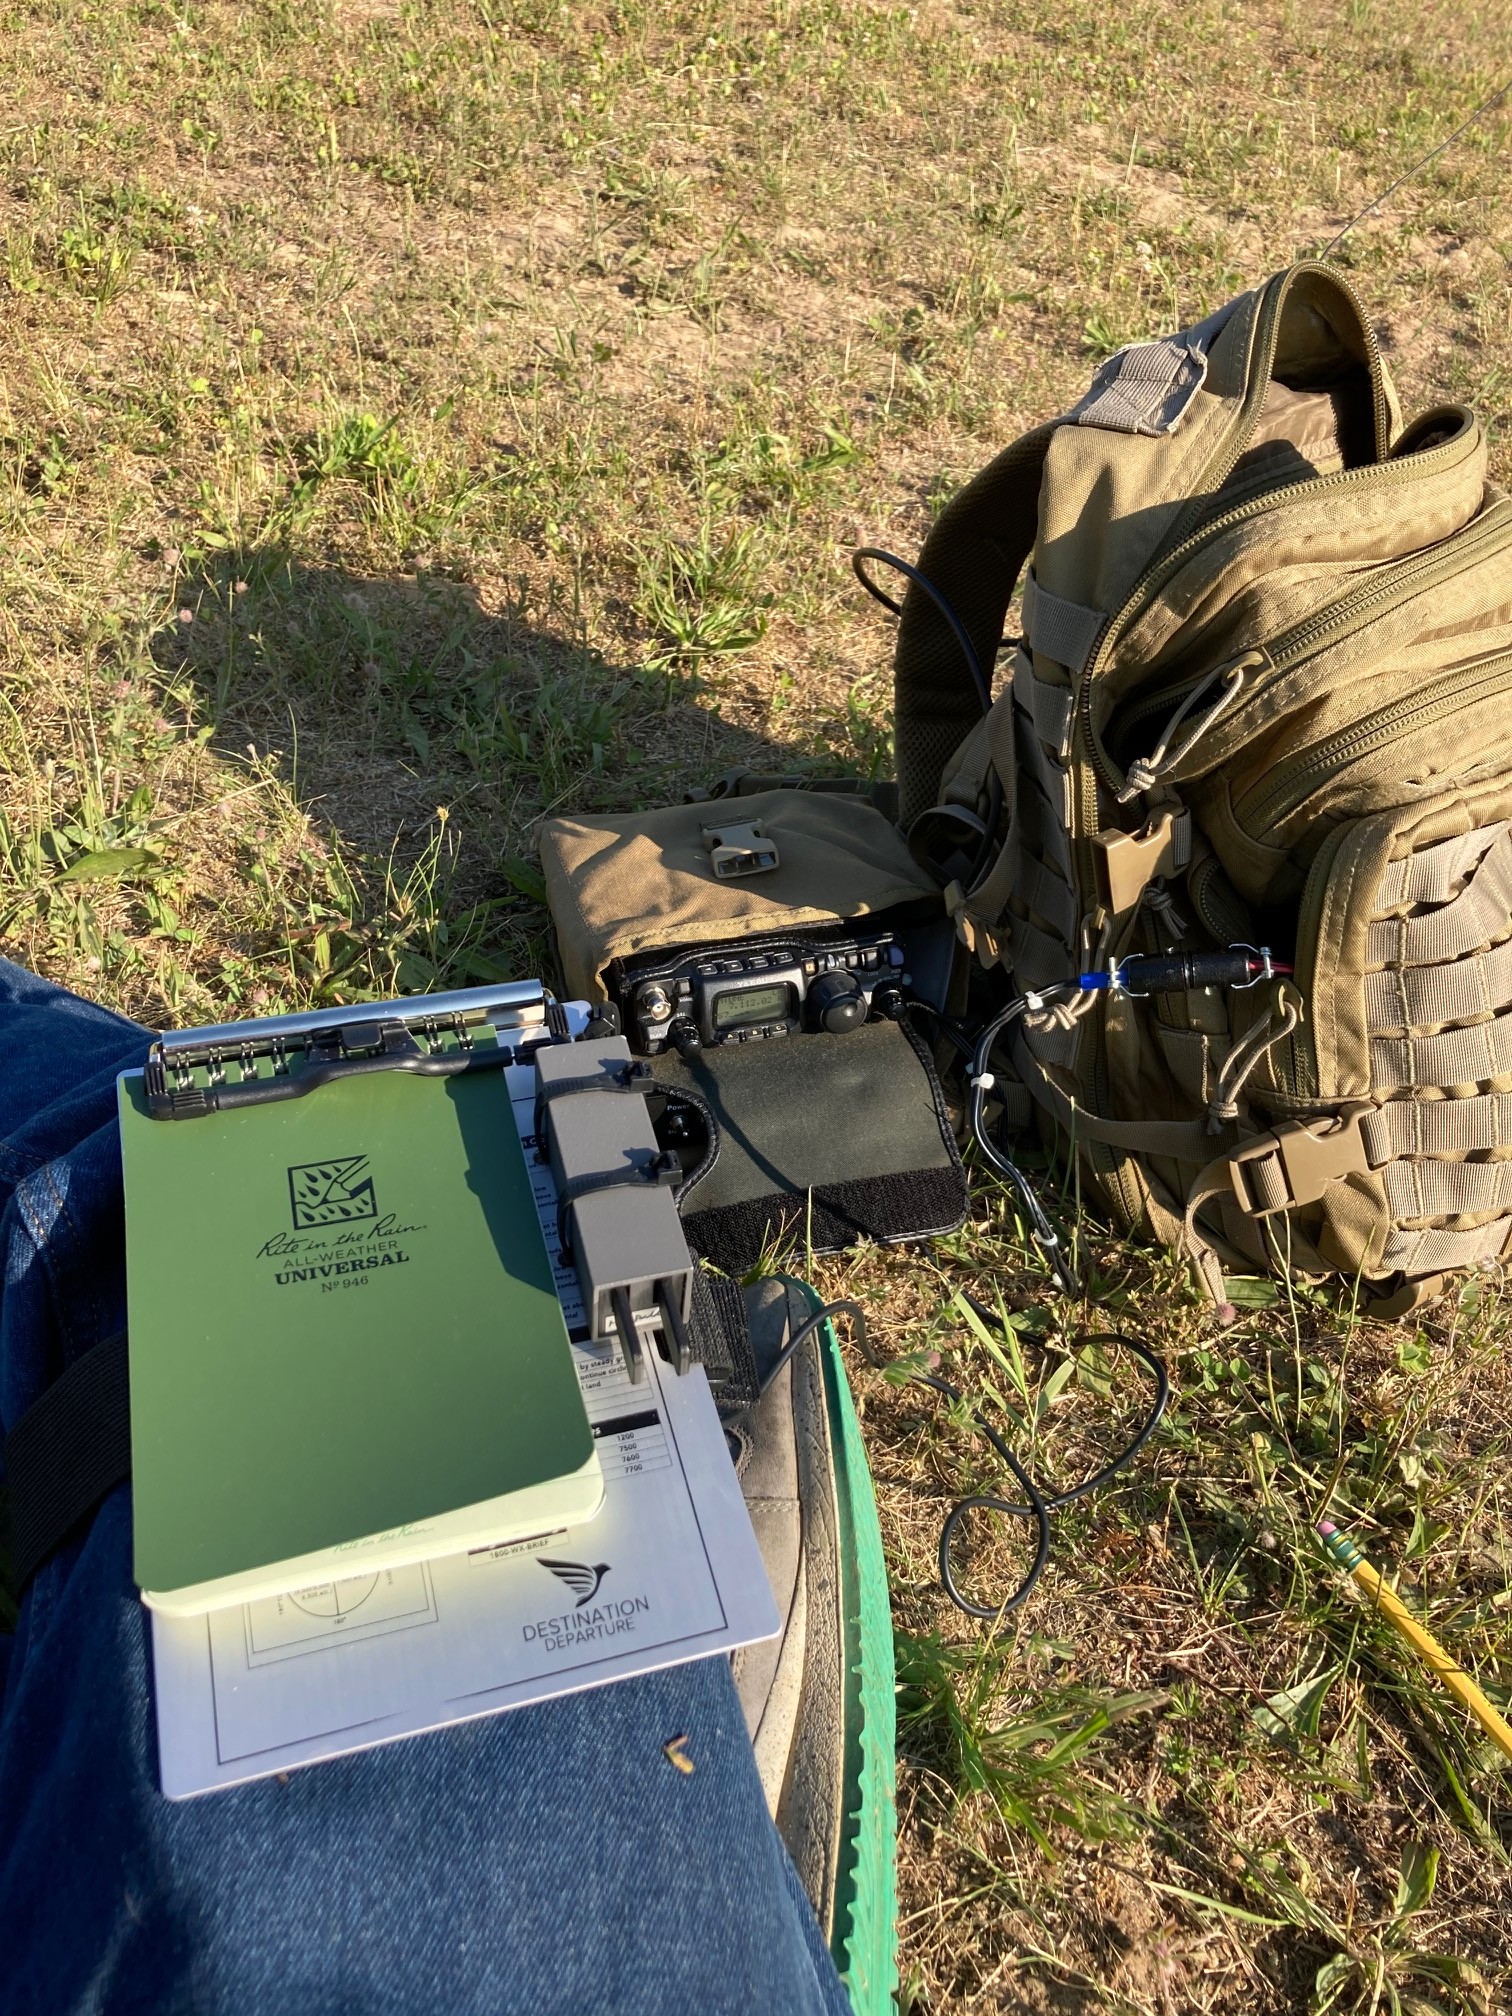 FT-817 in the Field with CW